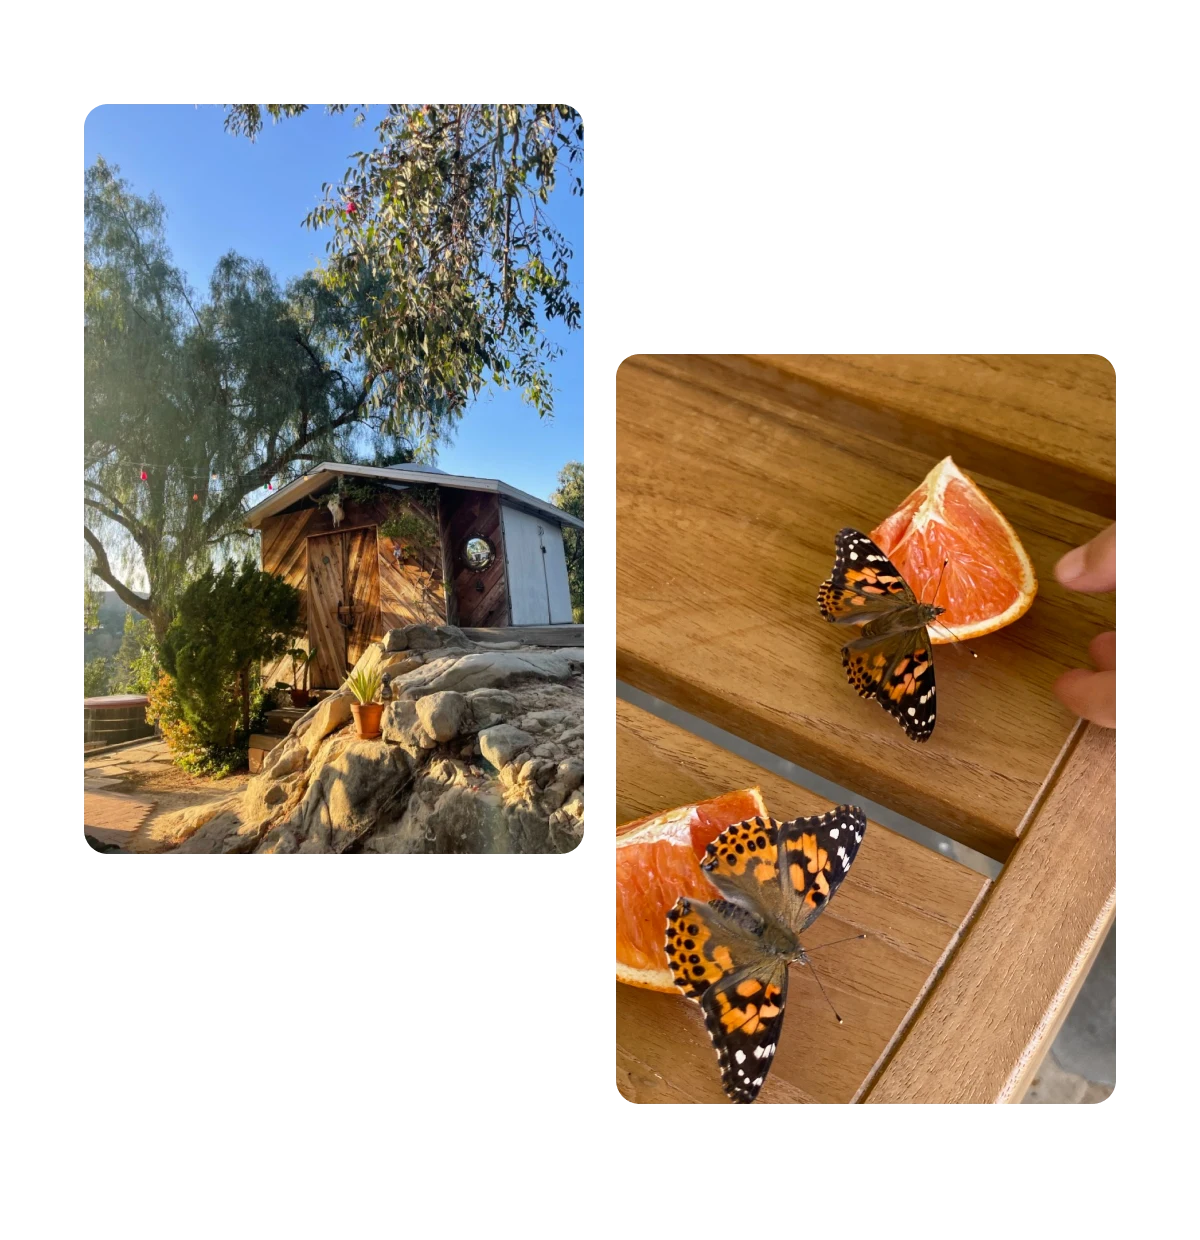 Two pins, outside of a home, butterflies on orange slices